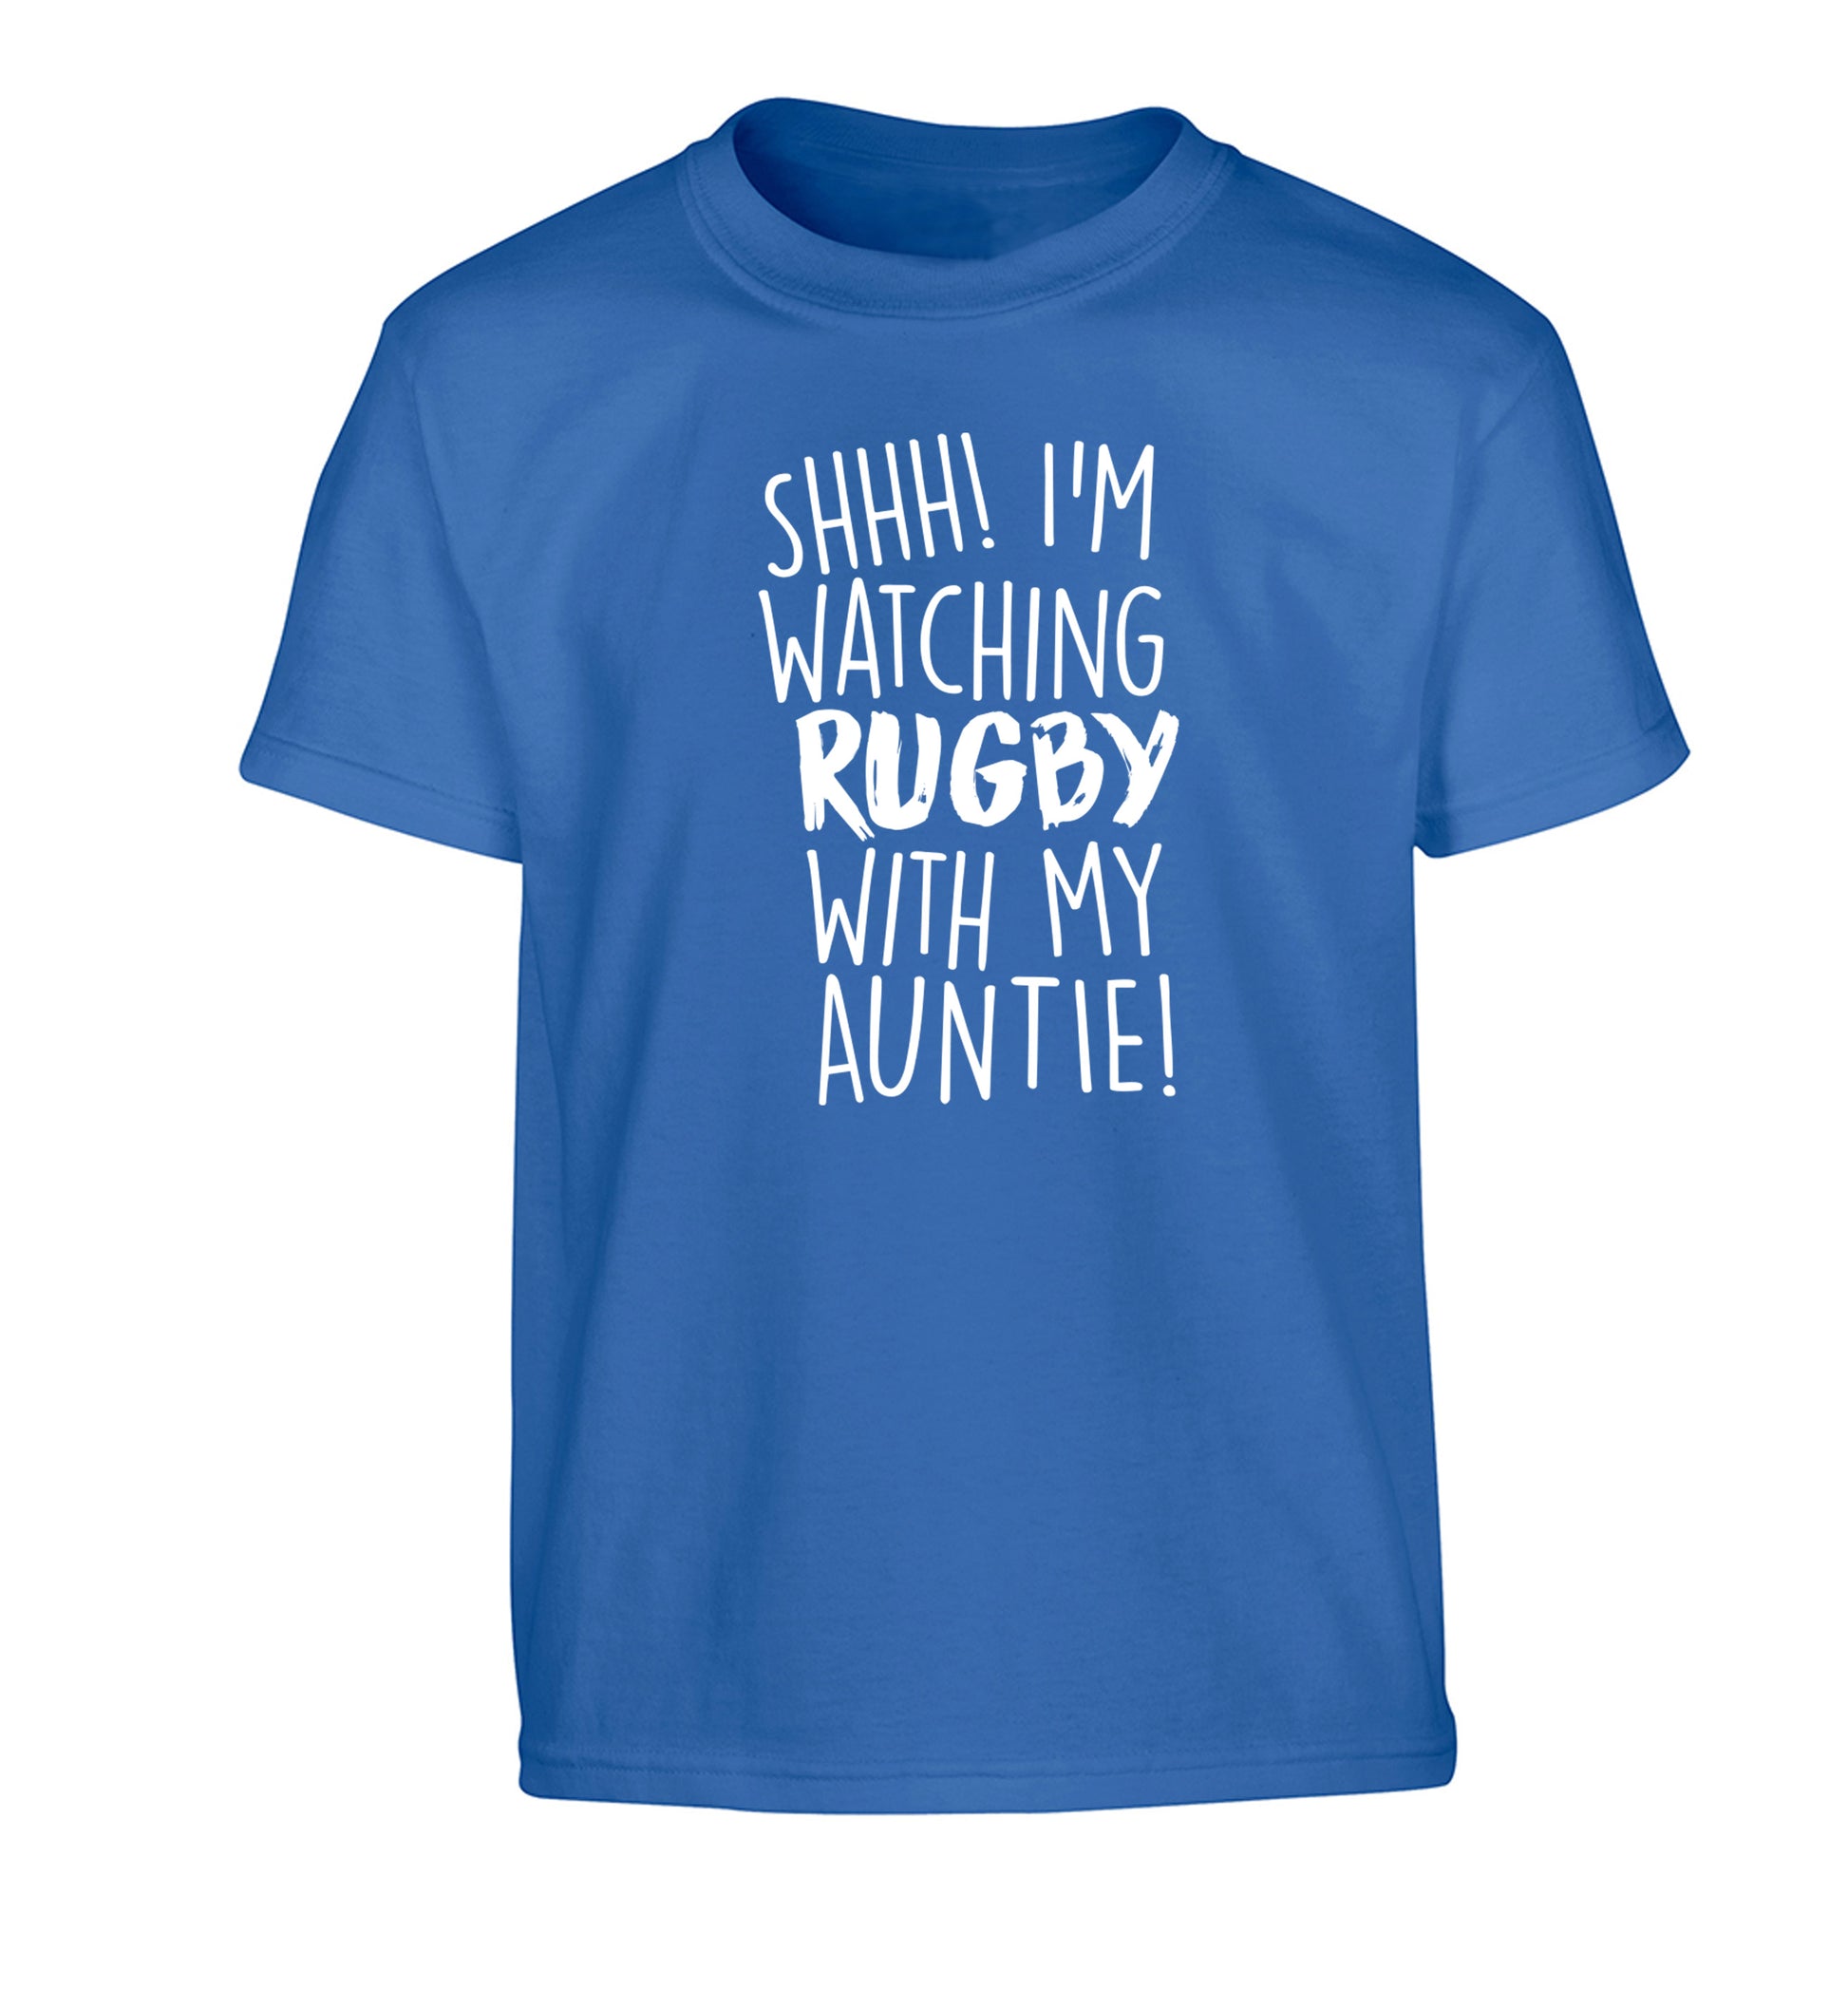 Shhh I'm watchin rugby with my auntie Children's blue Tshirt 12-13 Years